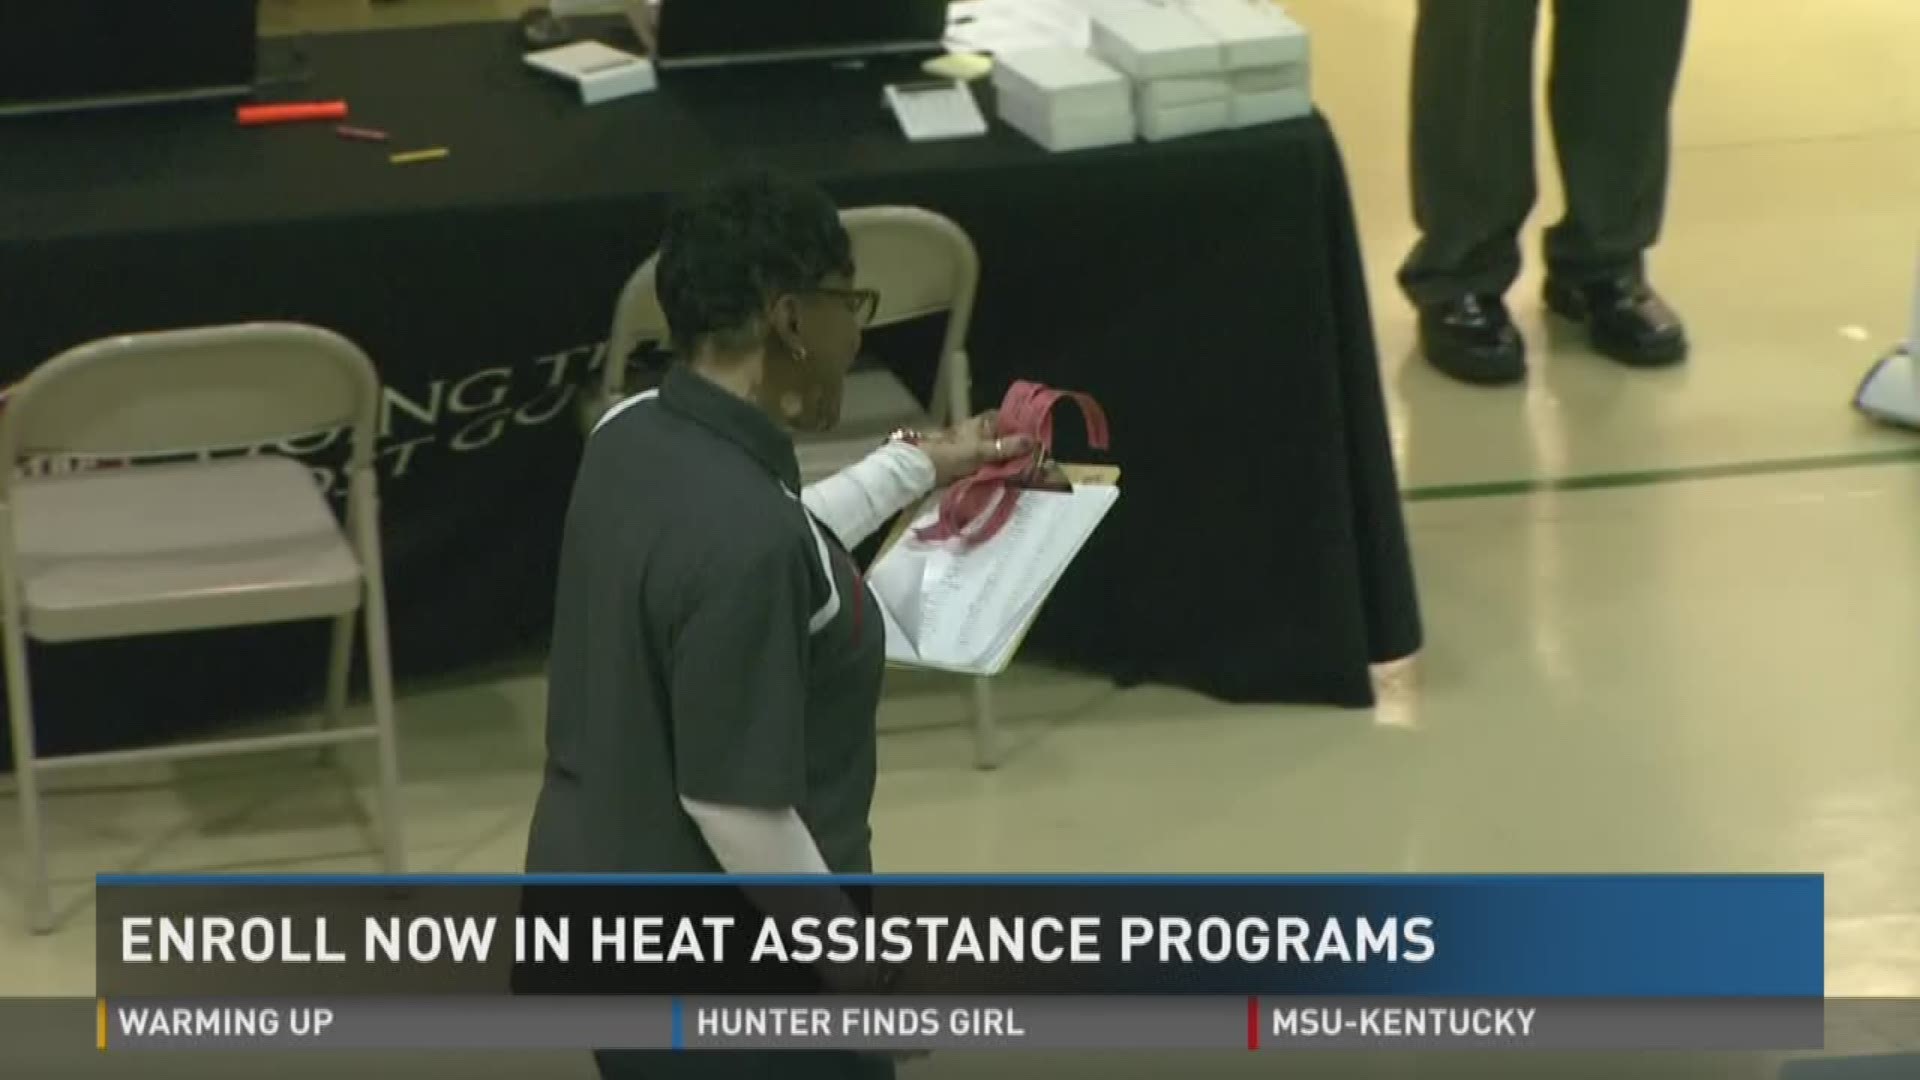 Heating assistance programs available